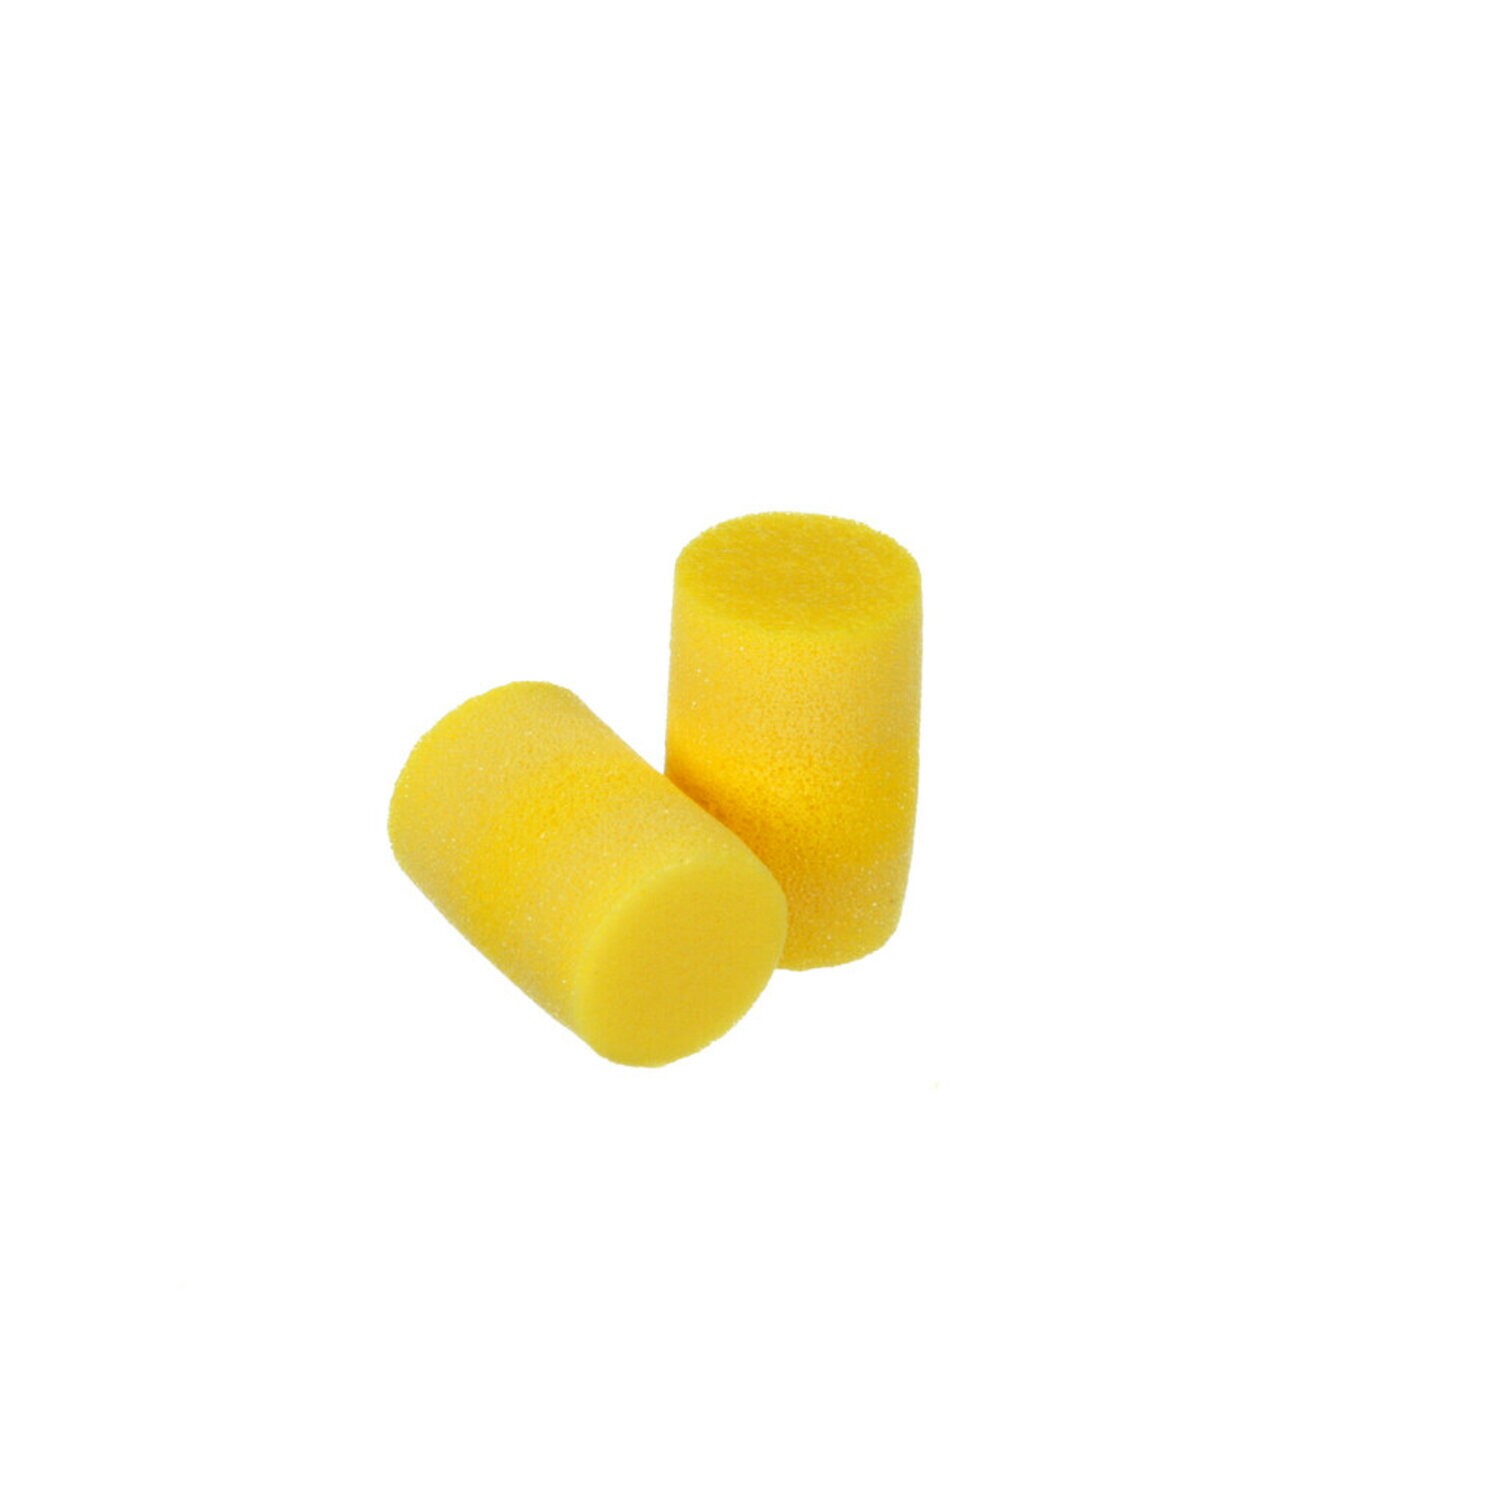 7000002299 - 3M E-A-R Classic Earplugs 310-1001, Uncorded, Pillow Pack, 2000
Pair/Case